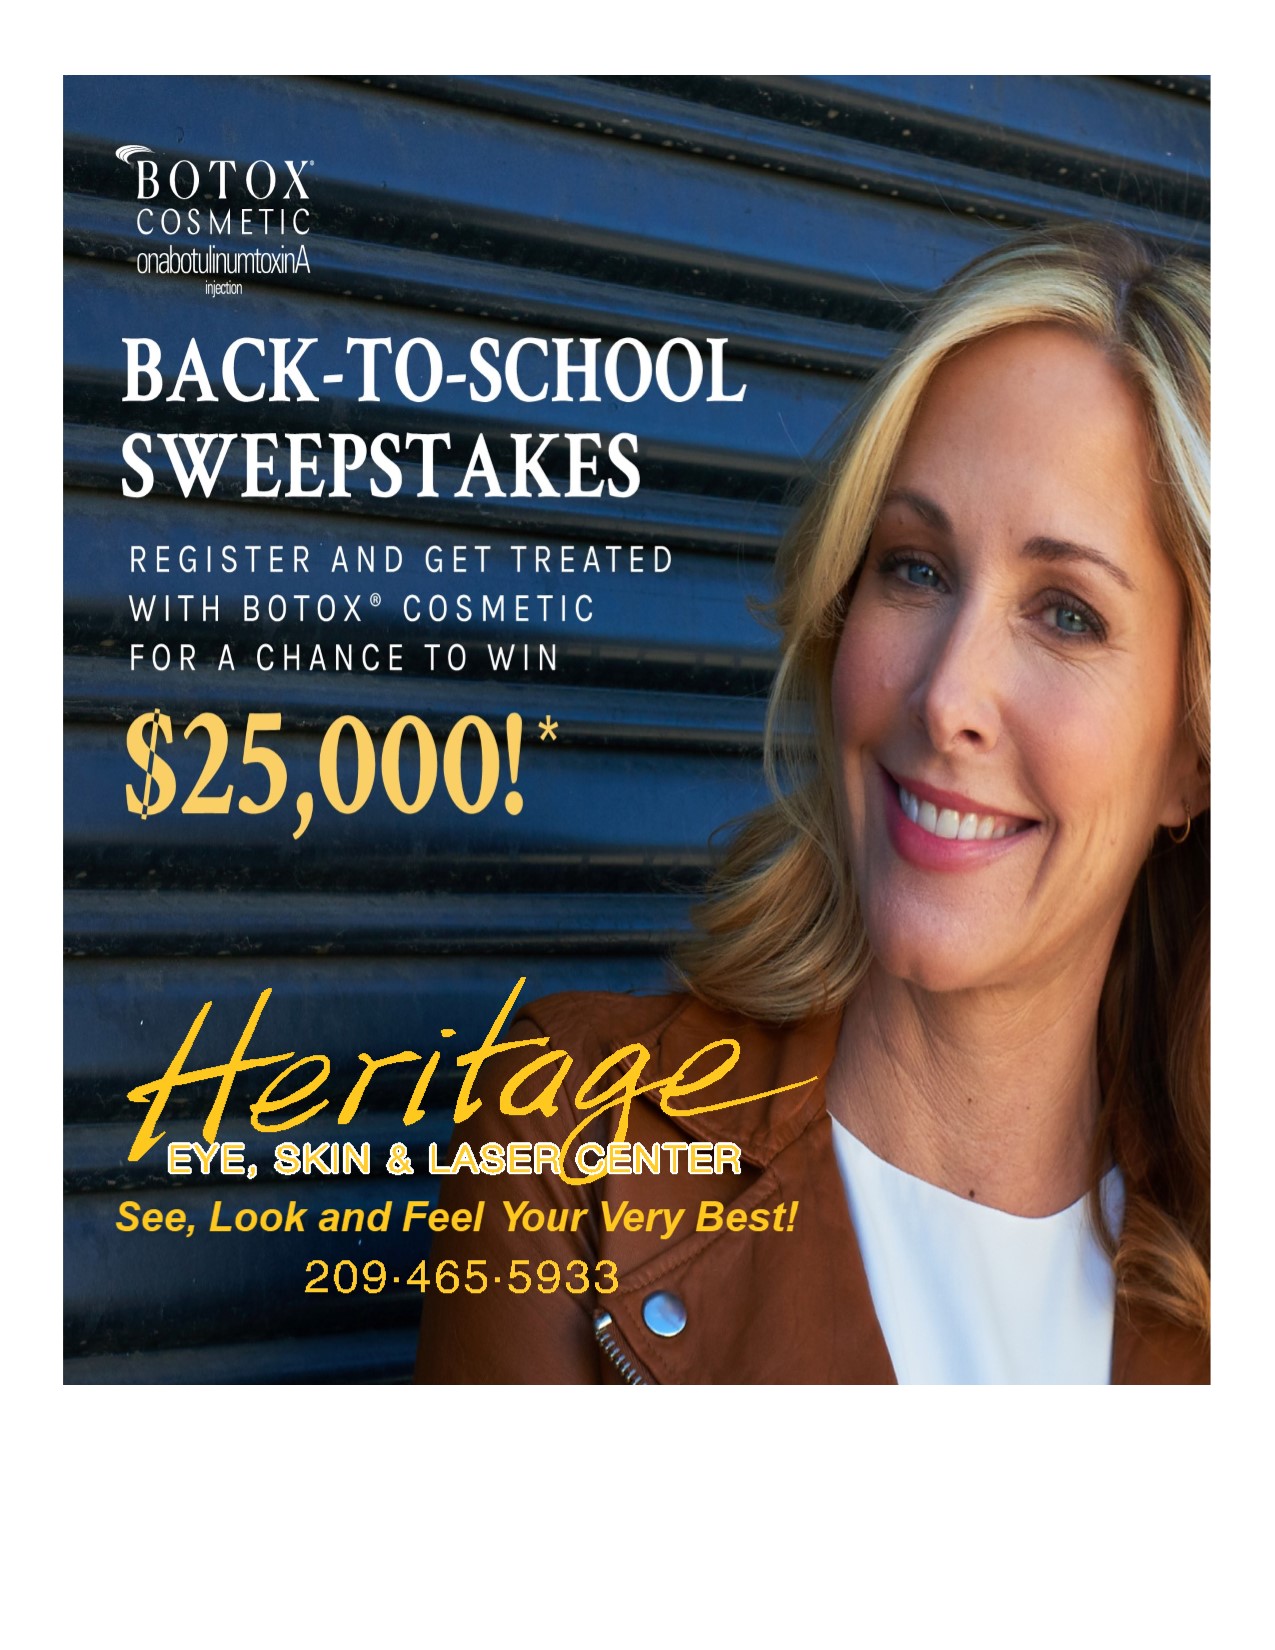 EXCITING NEWS!  Allergan is launching the BOTOX® Cosmetic Back-To-School Sweepstakes!